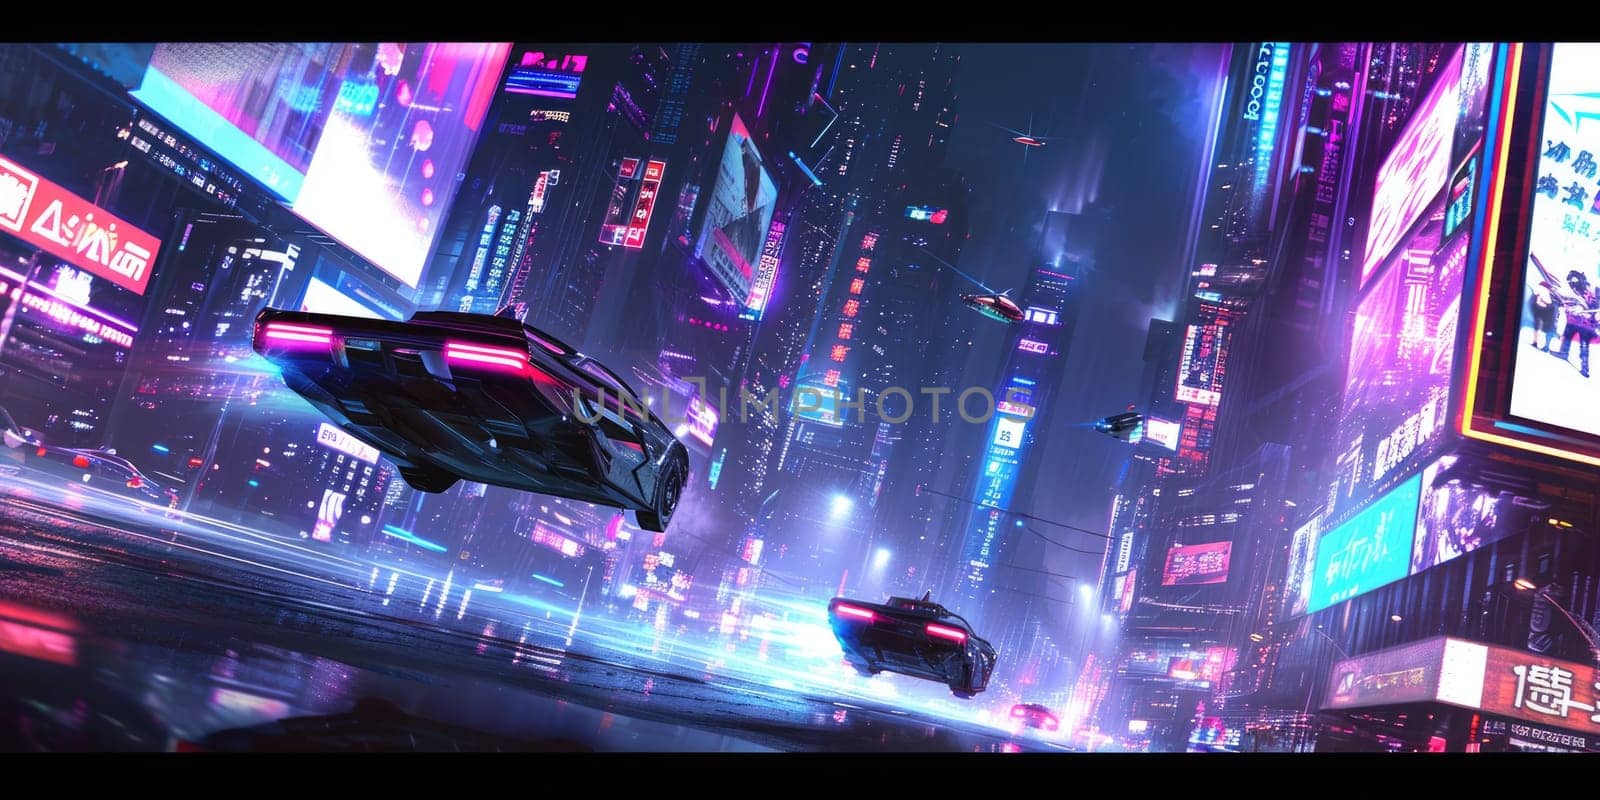 Futuristic Urban Skyline with Hovering Vehicles. Resplendent. by biancoblue